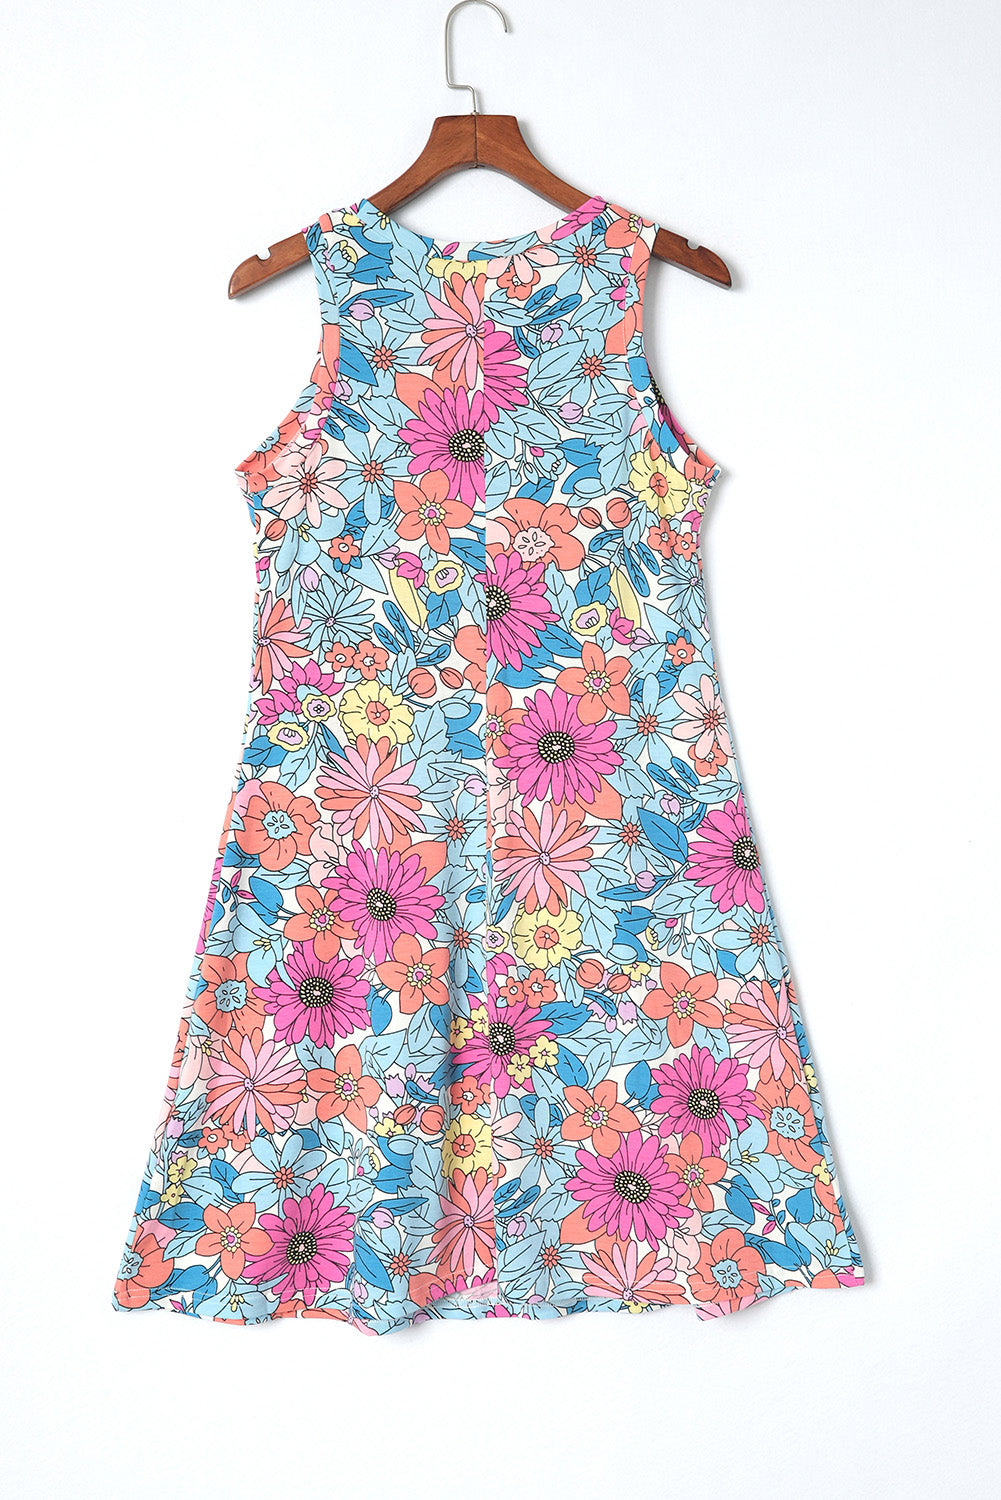 Floral Round Neck Sleeveless Dress The Stout Steer